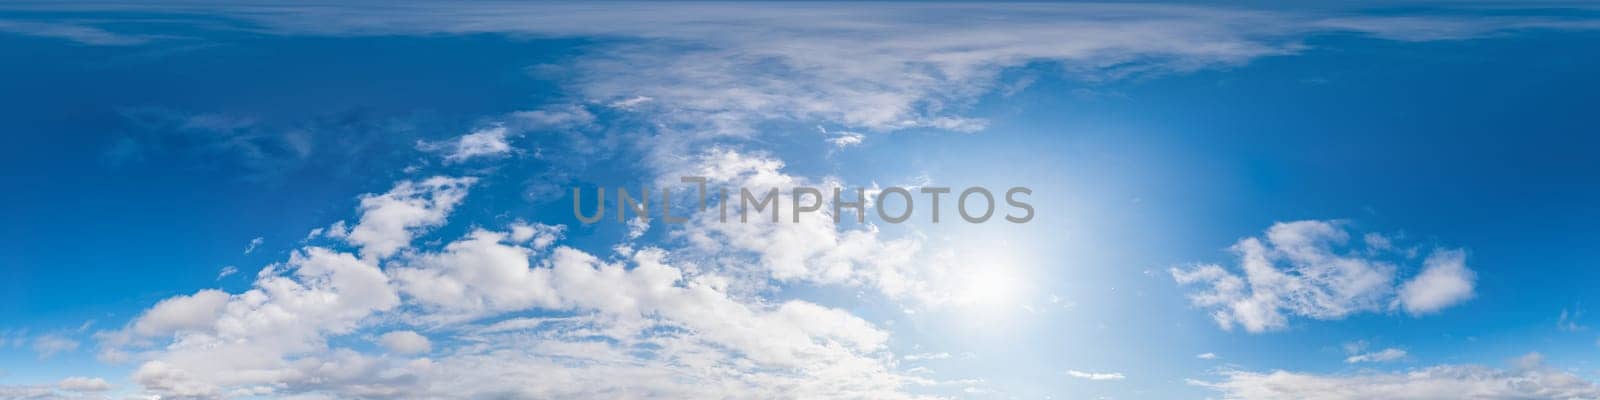 Sky 360 panorama - Bright blue sky filled with fluffy white Cirrus clouds. Seamless hdr spherical 360 panorama. Sky dome sky replacement for aerial drone 360 panoramas. Weather and climate change by Matiunina